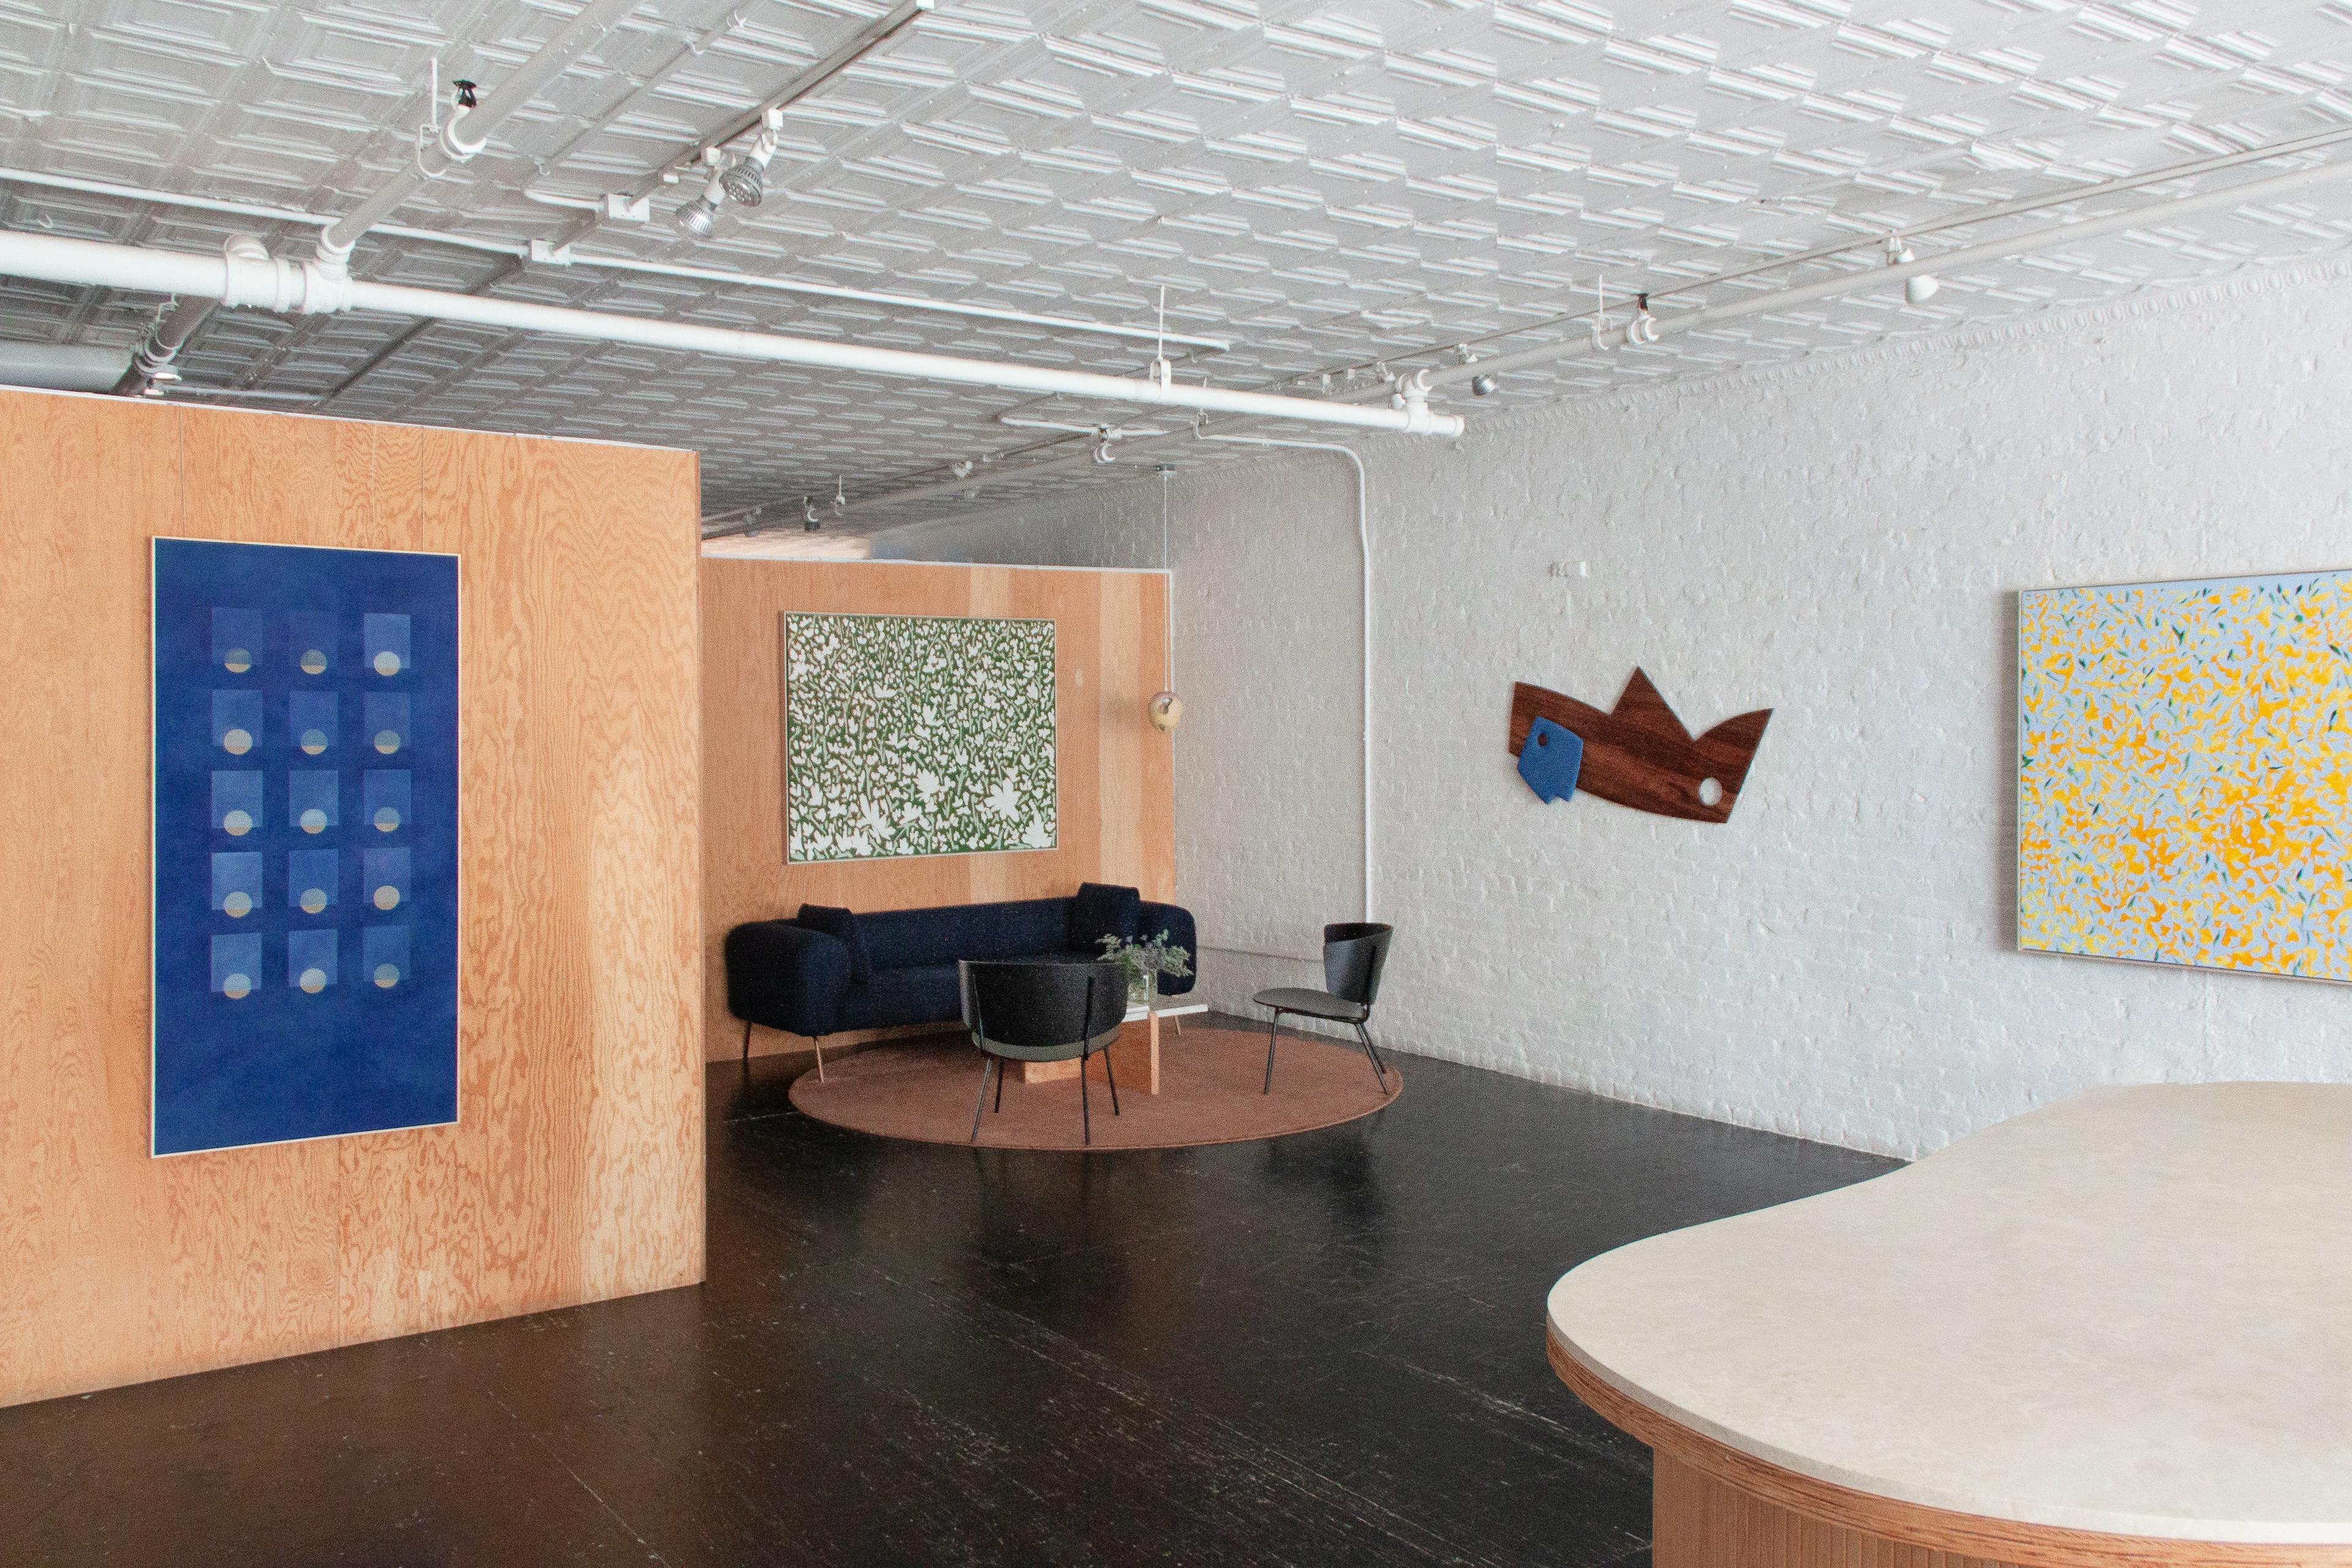 Artwork by Fitzhugh Karol, Kit Porter, and Carla Weeks in the exhibition Mapping the Margin at Uprise Art.